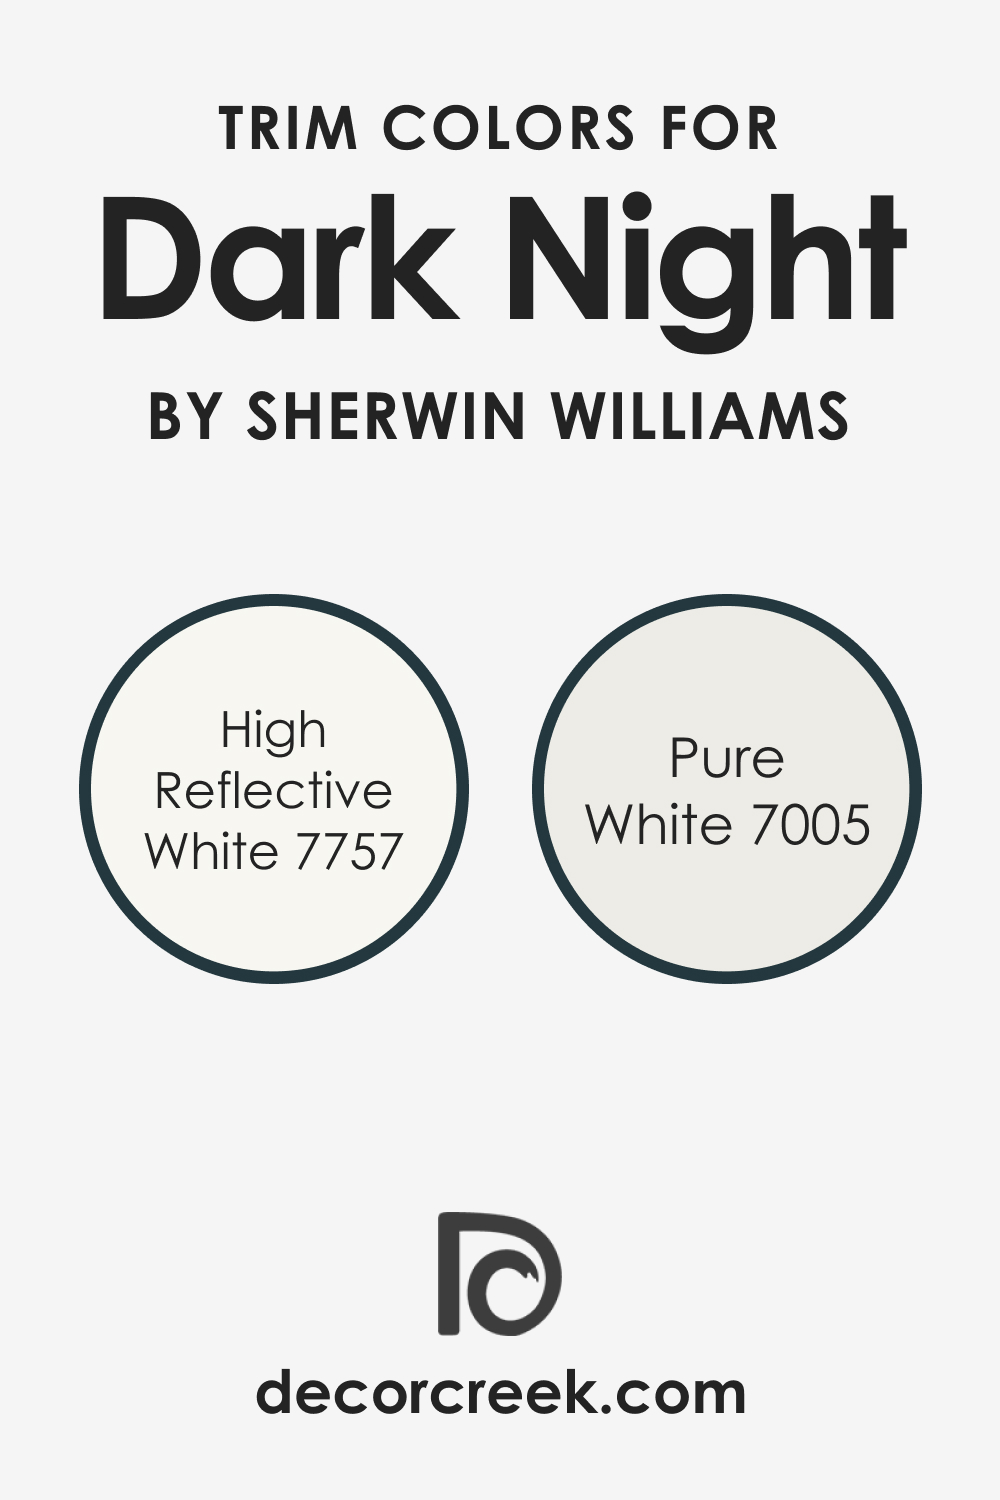 What Is the Best Trim Color to Use With SW Dark Night?